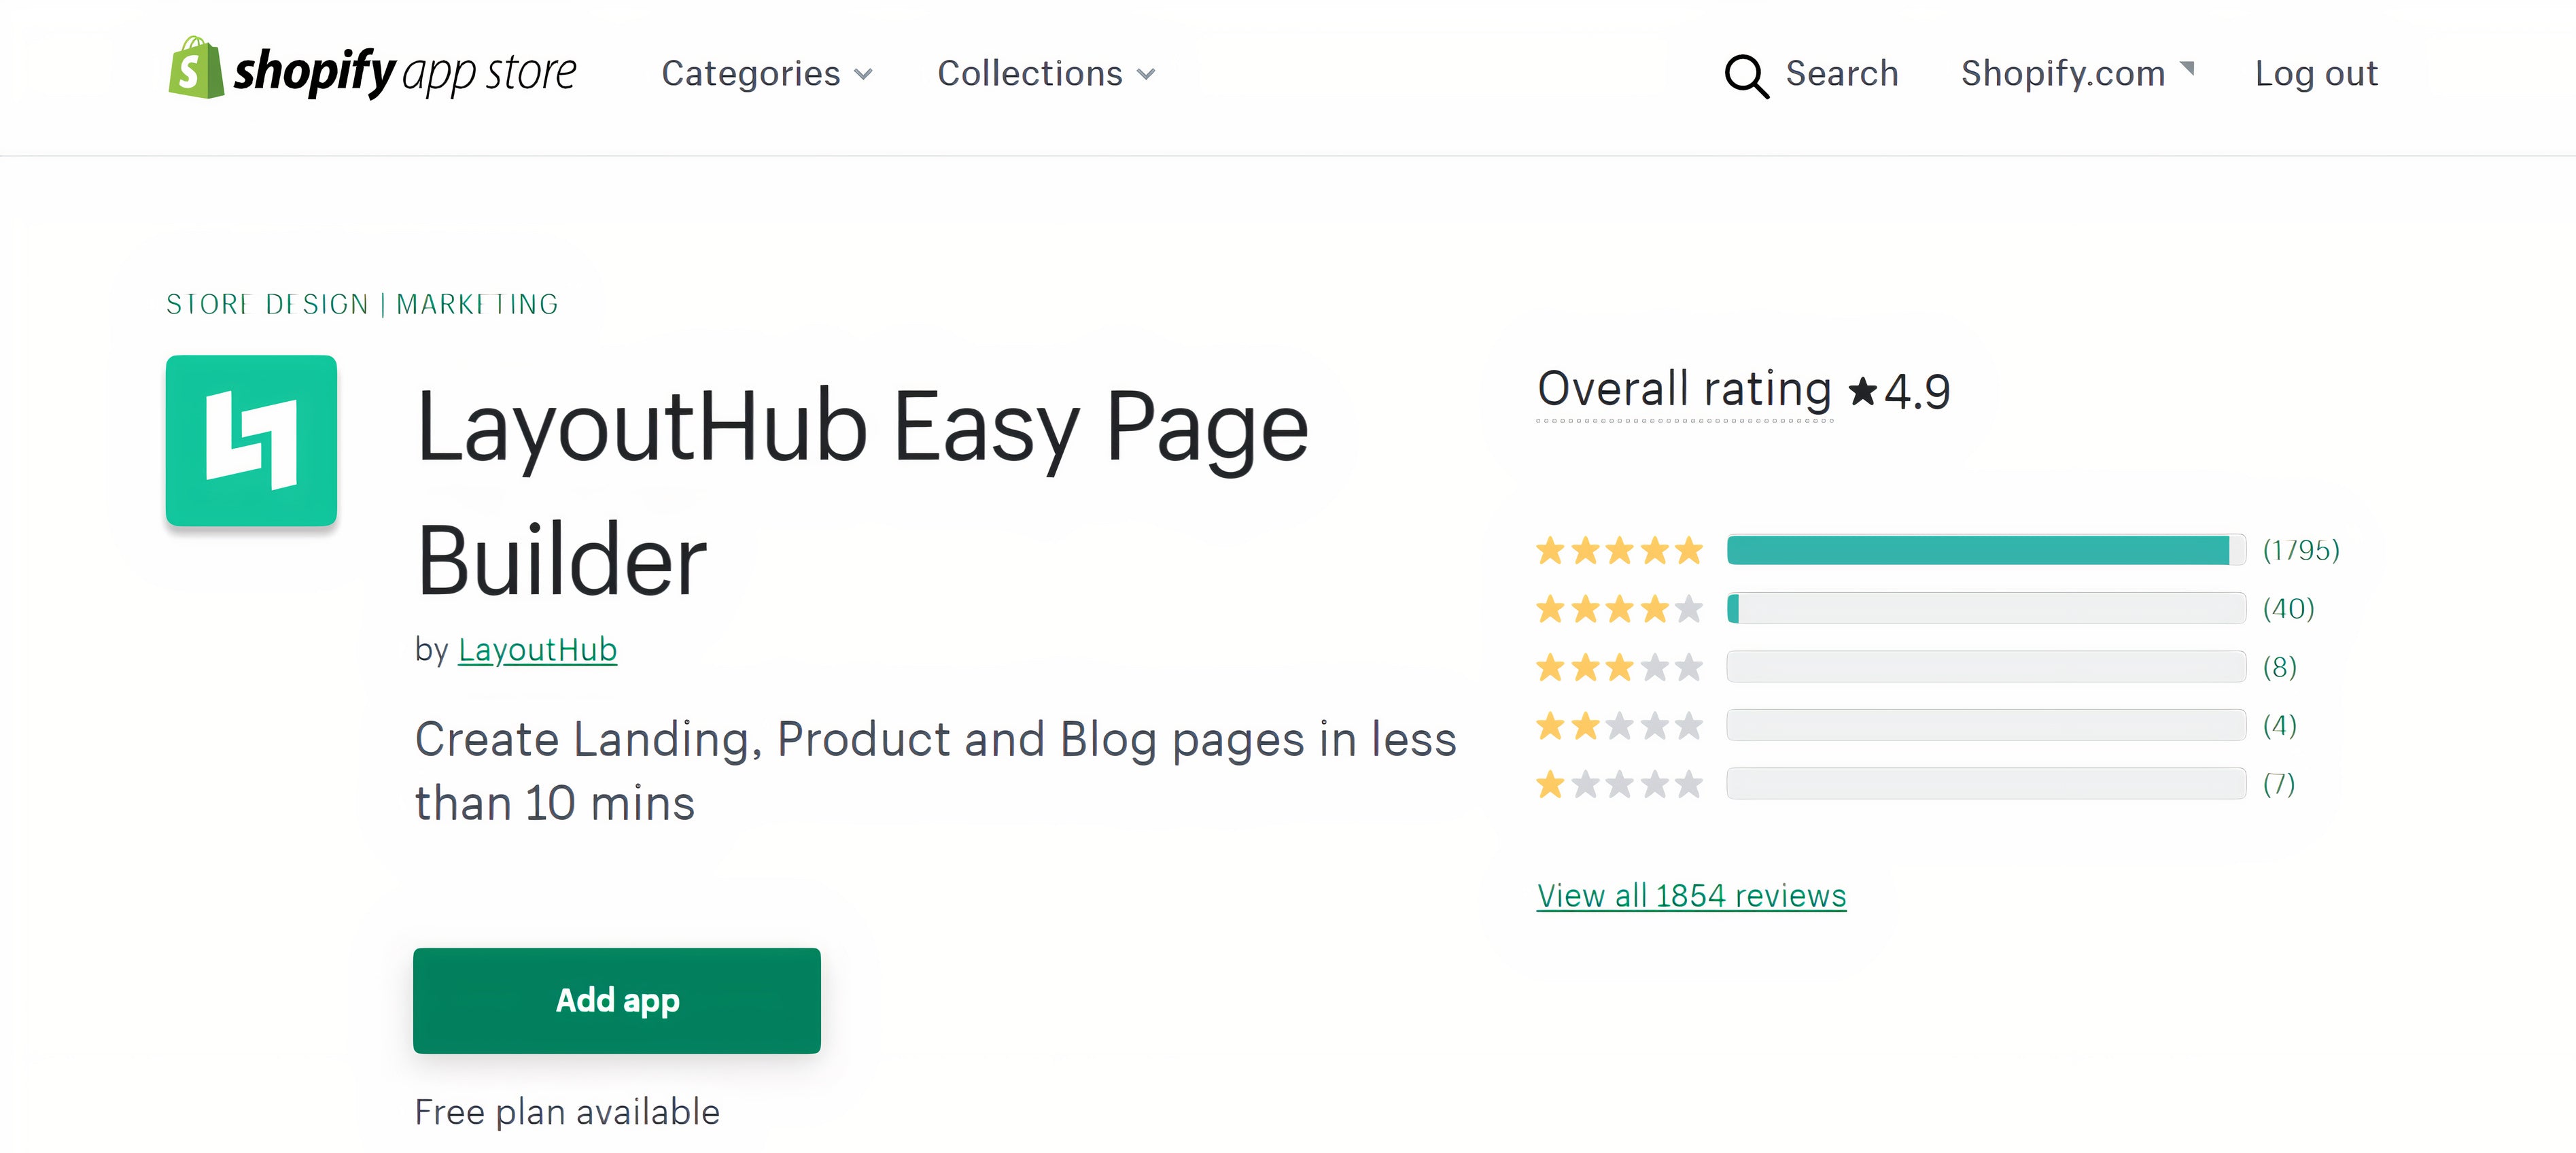 The user rate LayoutHub 4.9/5.0